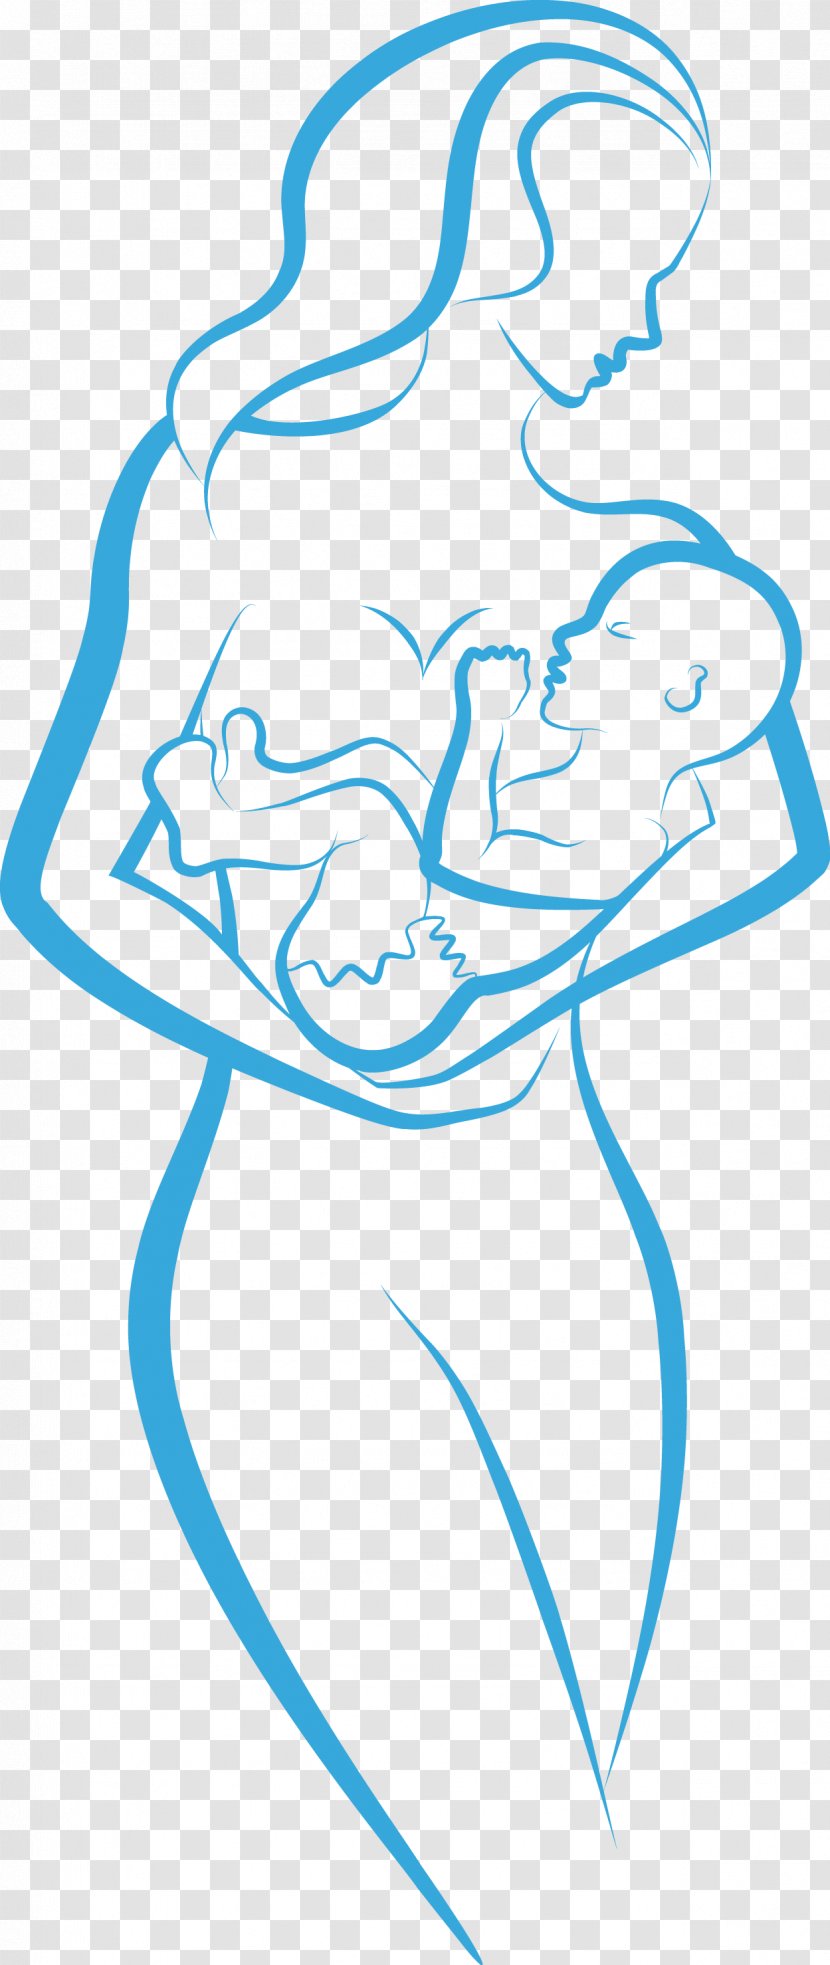 Breastfeeding Mother Illustration - Silhouette - The Woman Holding Child Transparent PNG